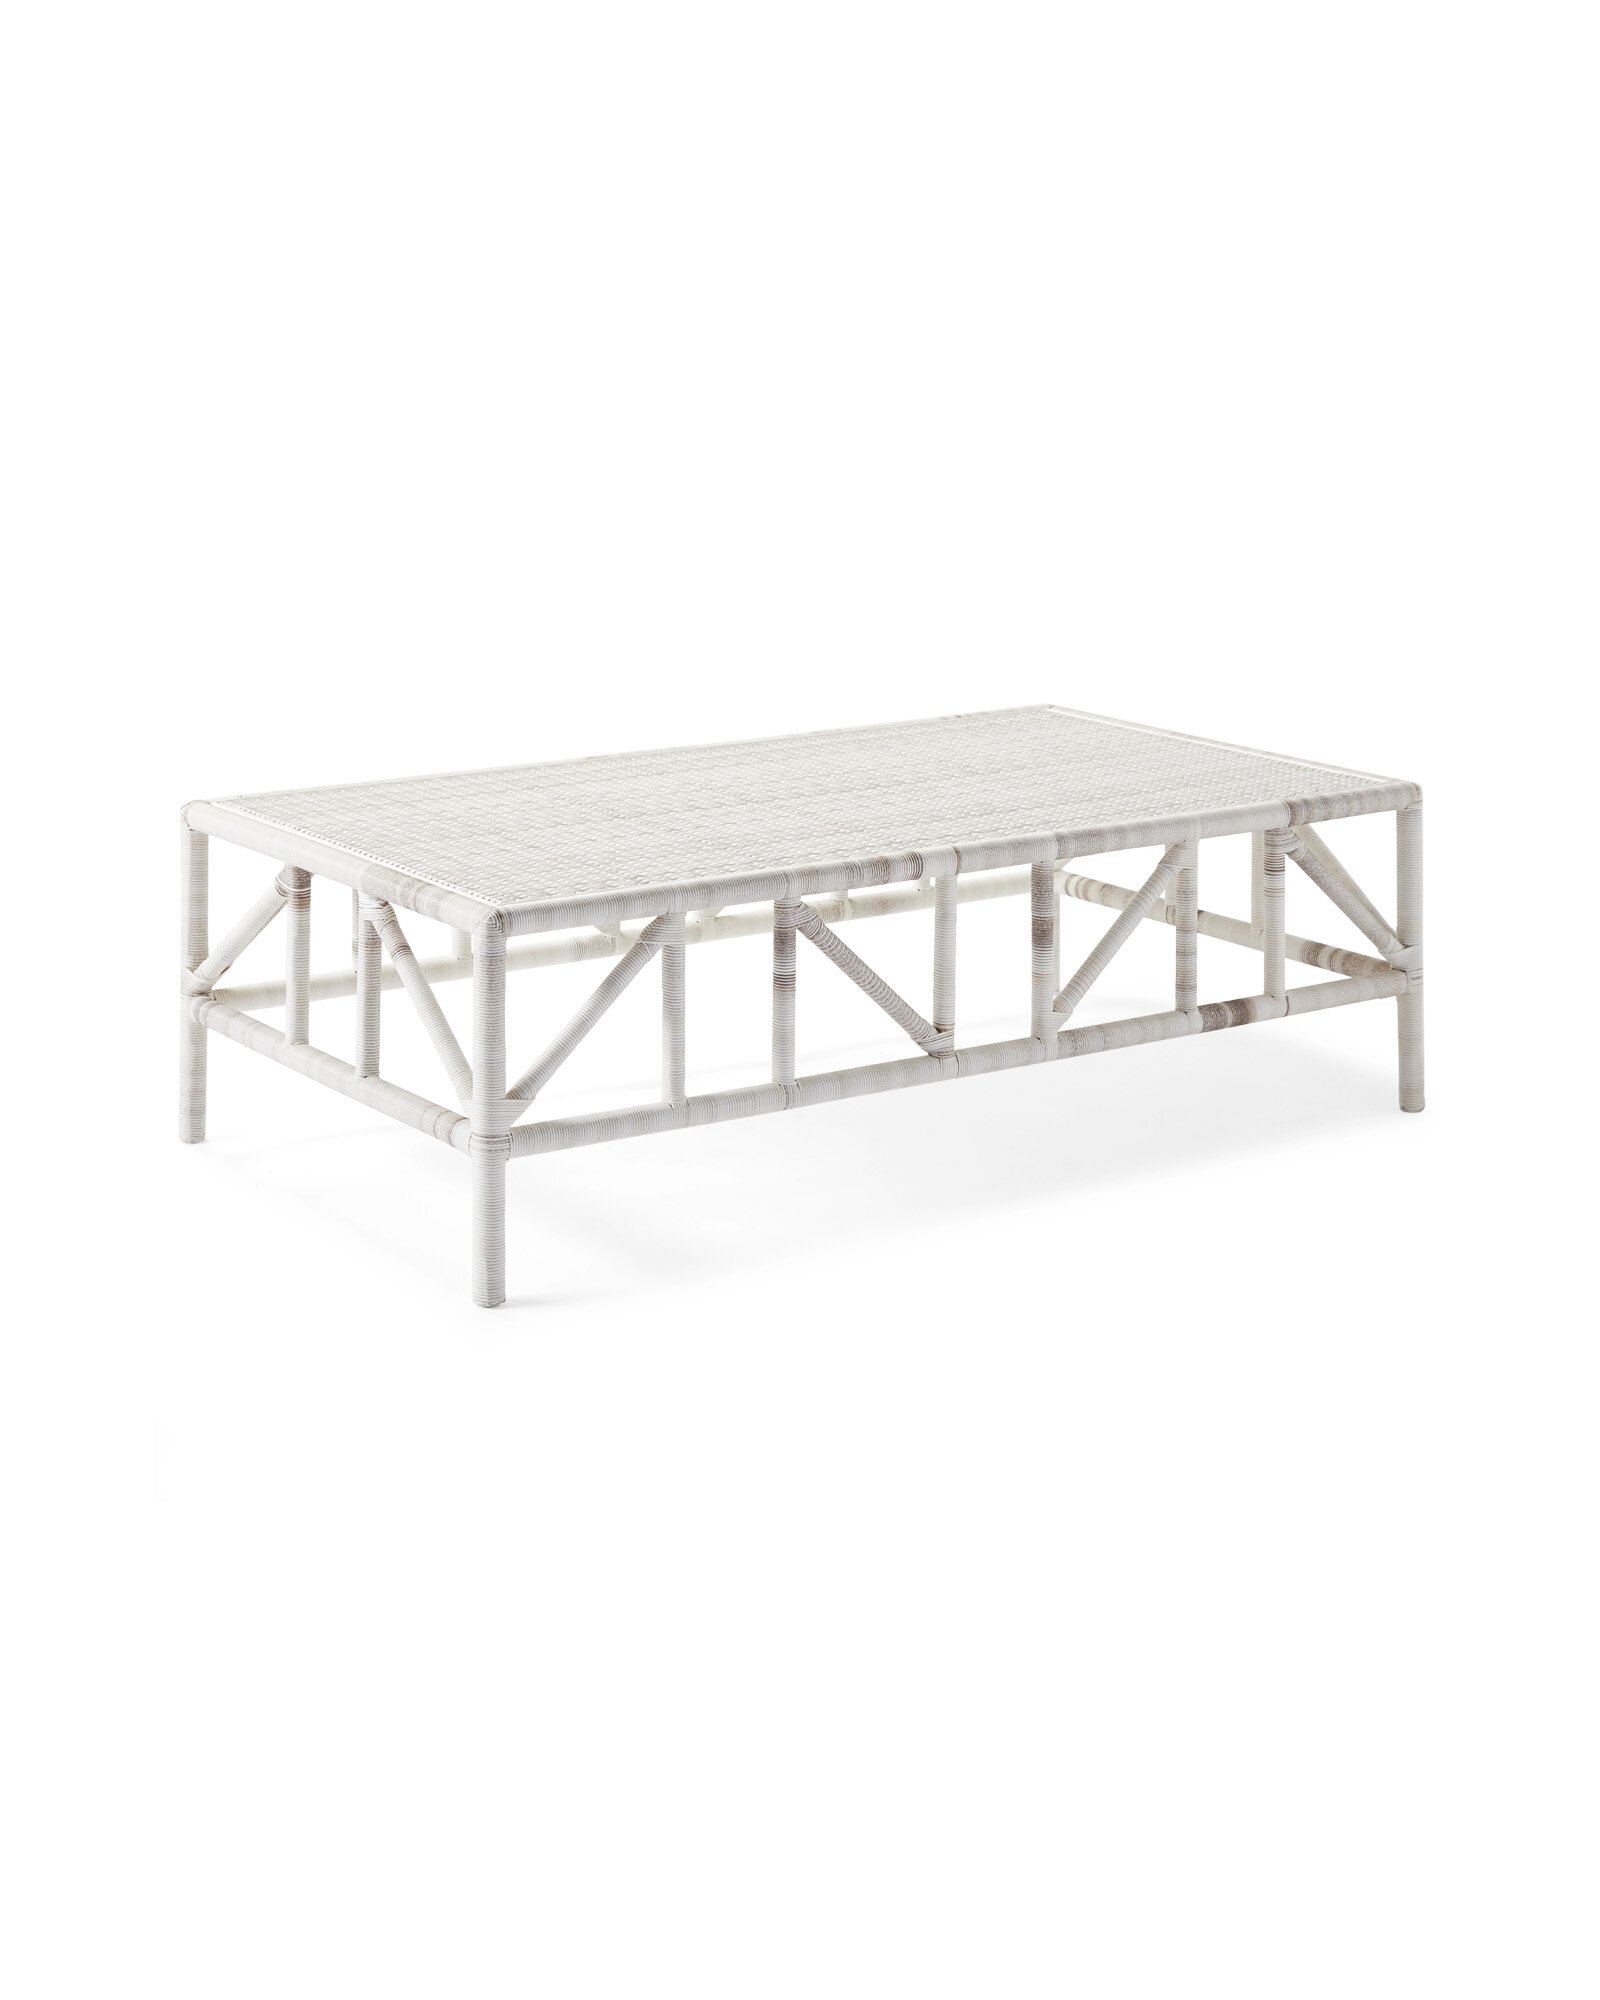 Trestle Outdoor Coffee Table - Serena and Lily.jpeg